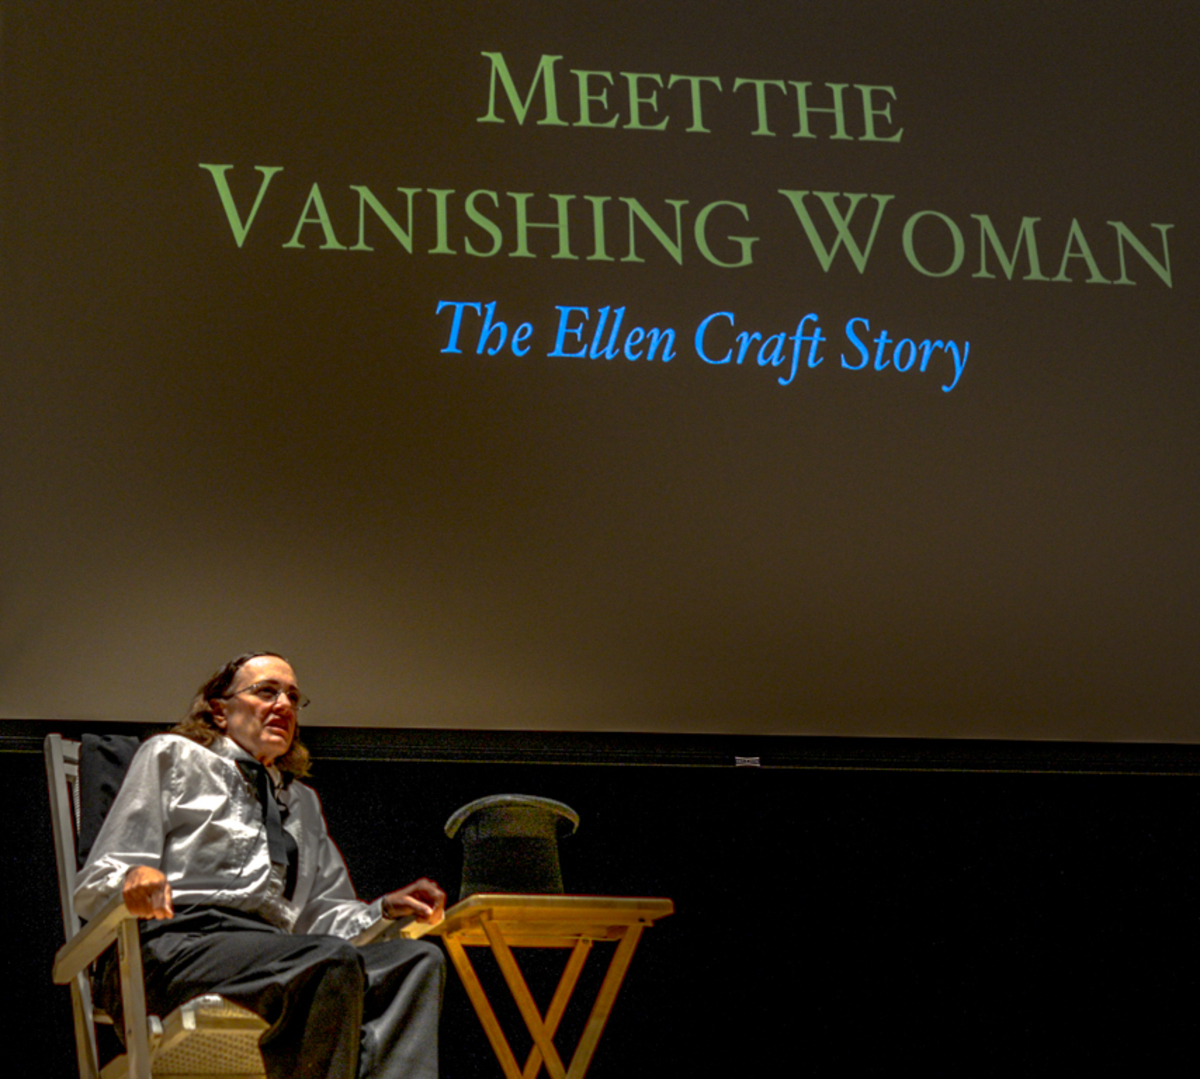 Performance of the one woman show Meet the Vanishing Woman The Ellen Craft Story. The 11am Wednesday March 4 performance was held in the Spartan Auditorium and was open to all students.